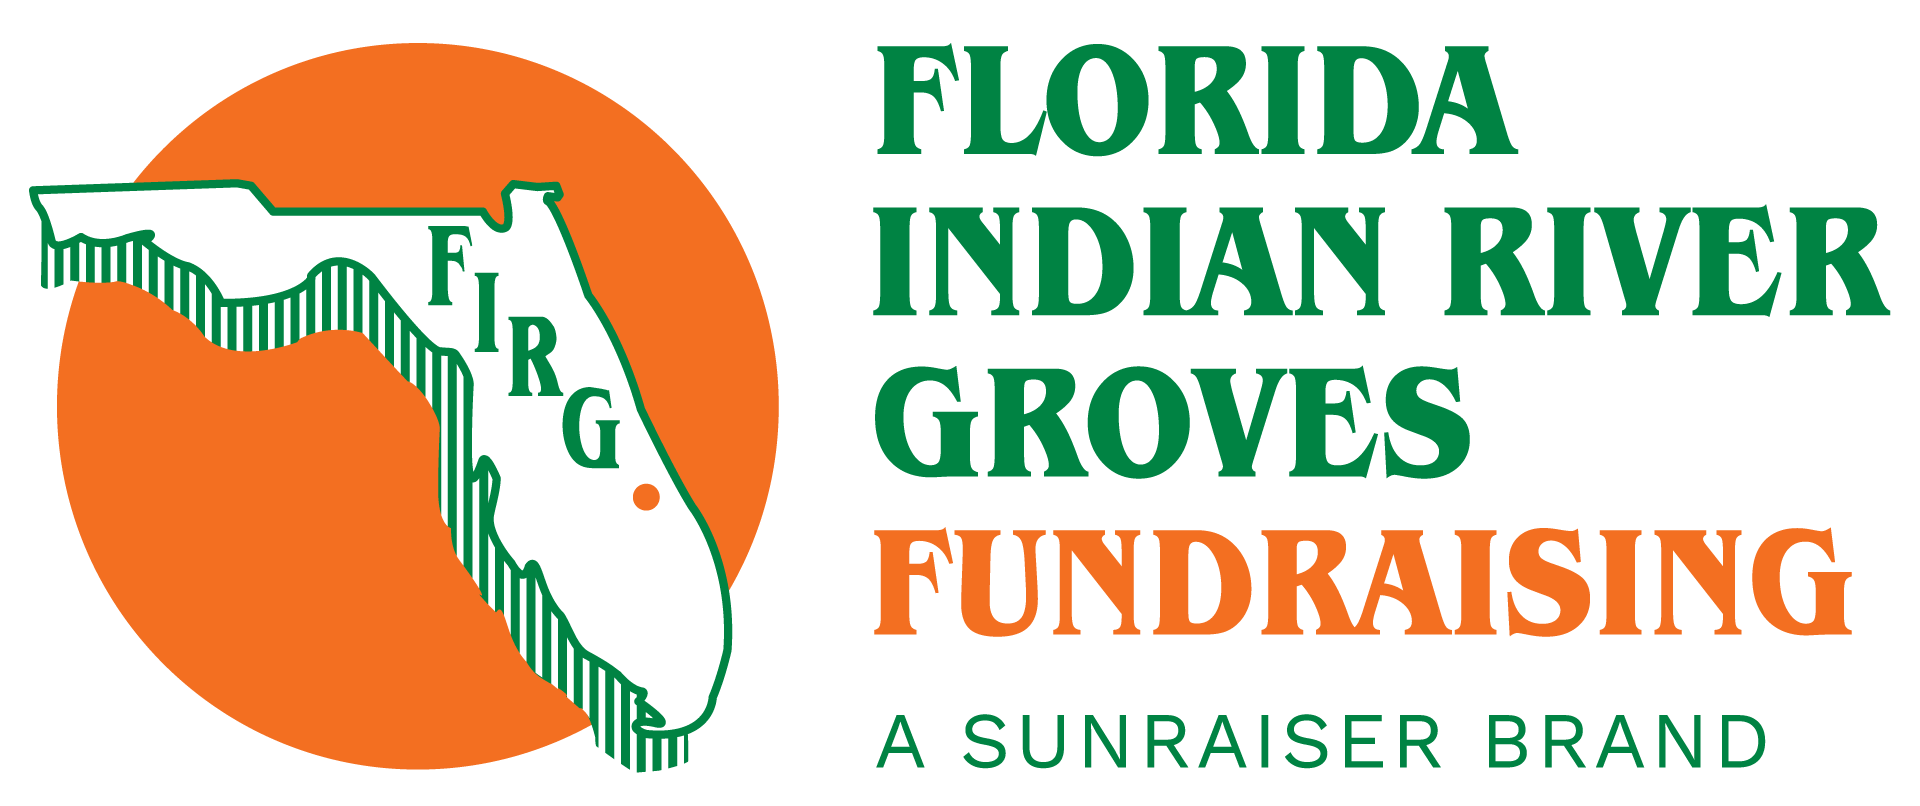 Florida Indian River Groves Fundraising